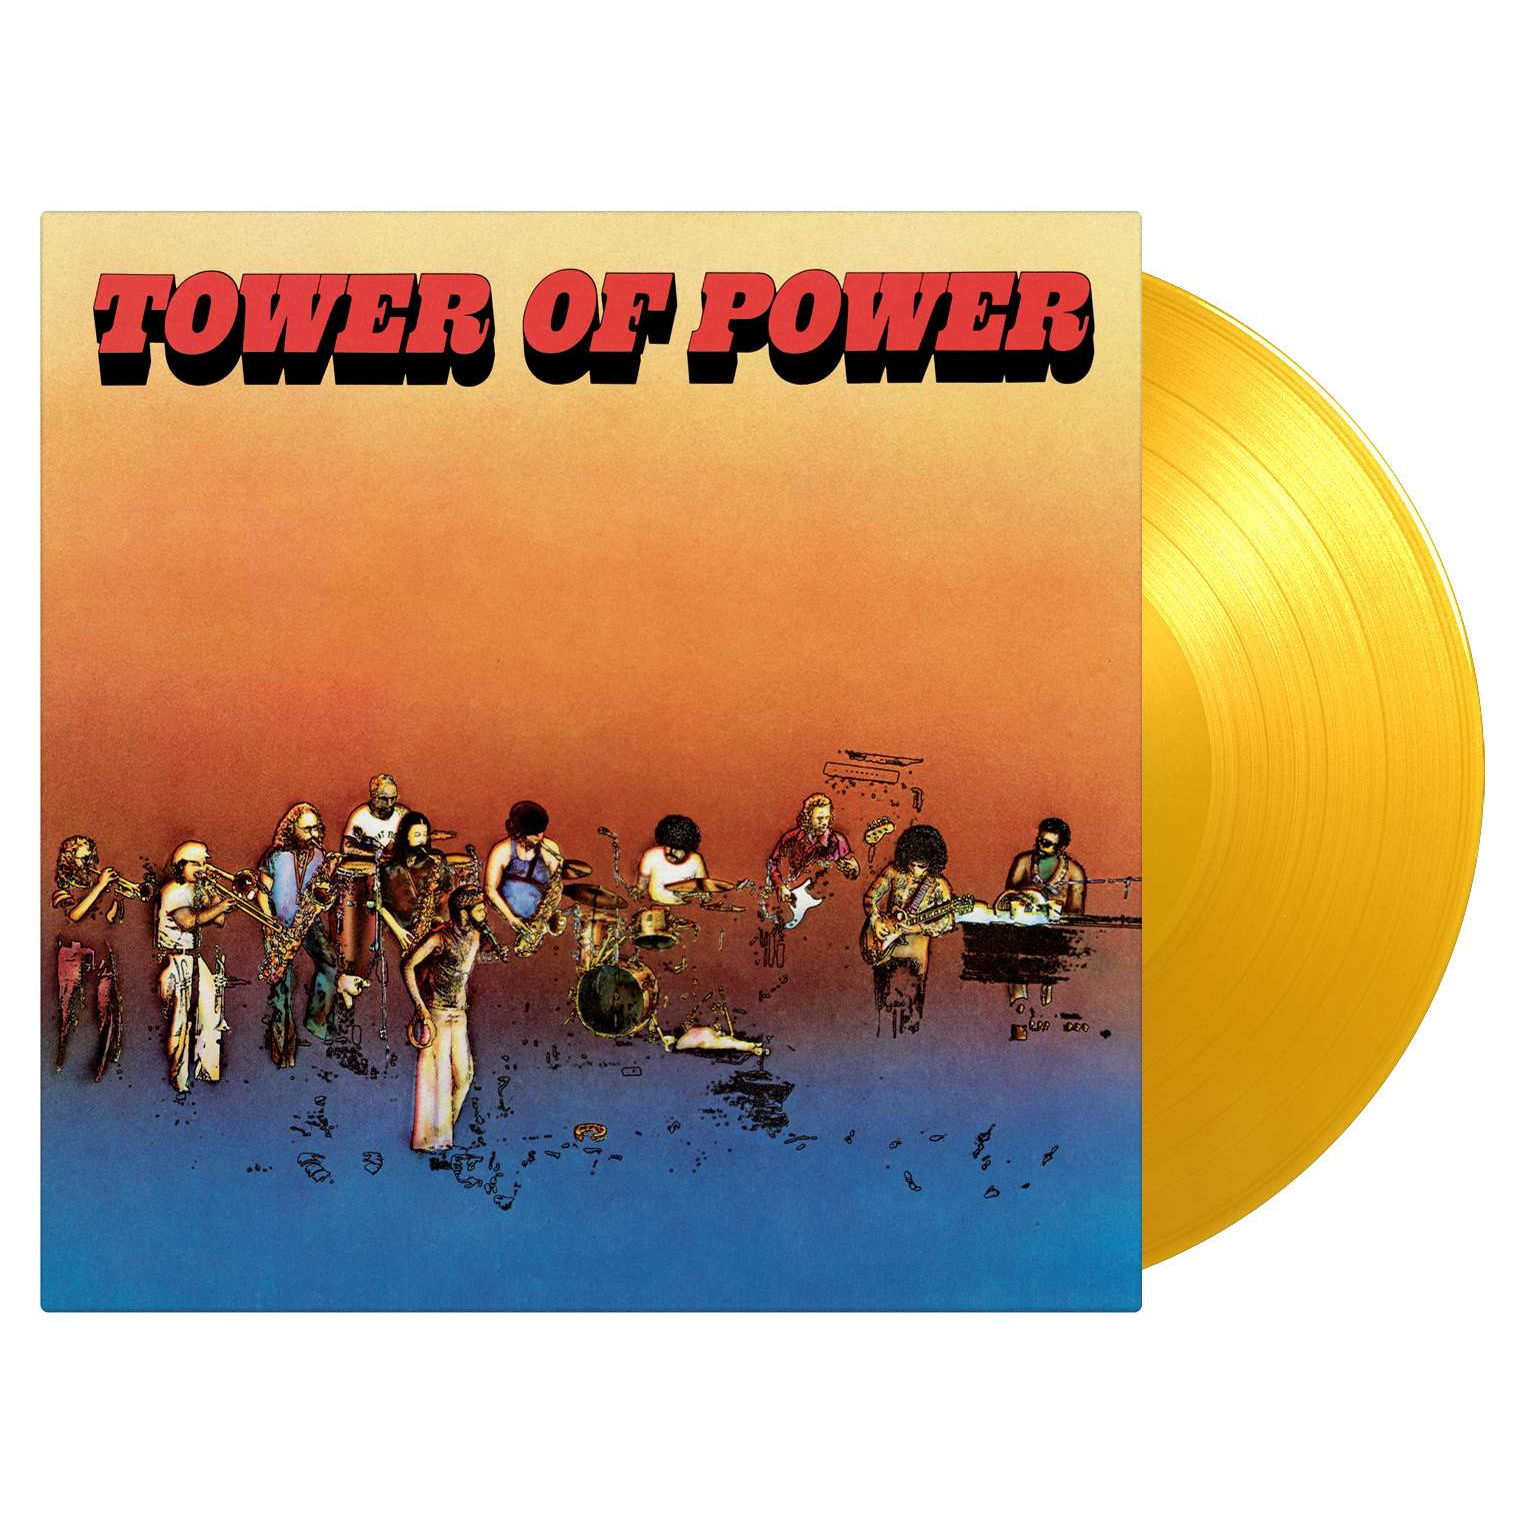 TOWER OF POWER 180 GR. / 2000 NUMBERED COPIES ON TRANSLUCENT YELLOW VINYL